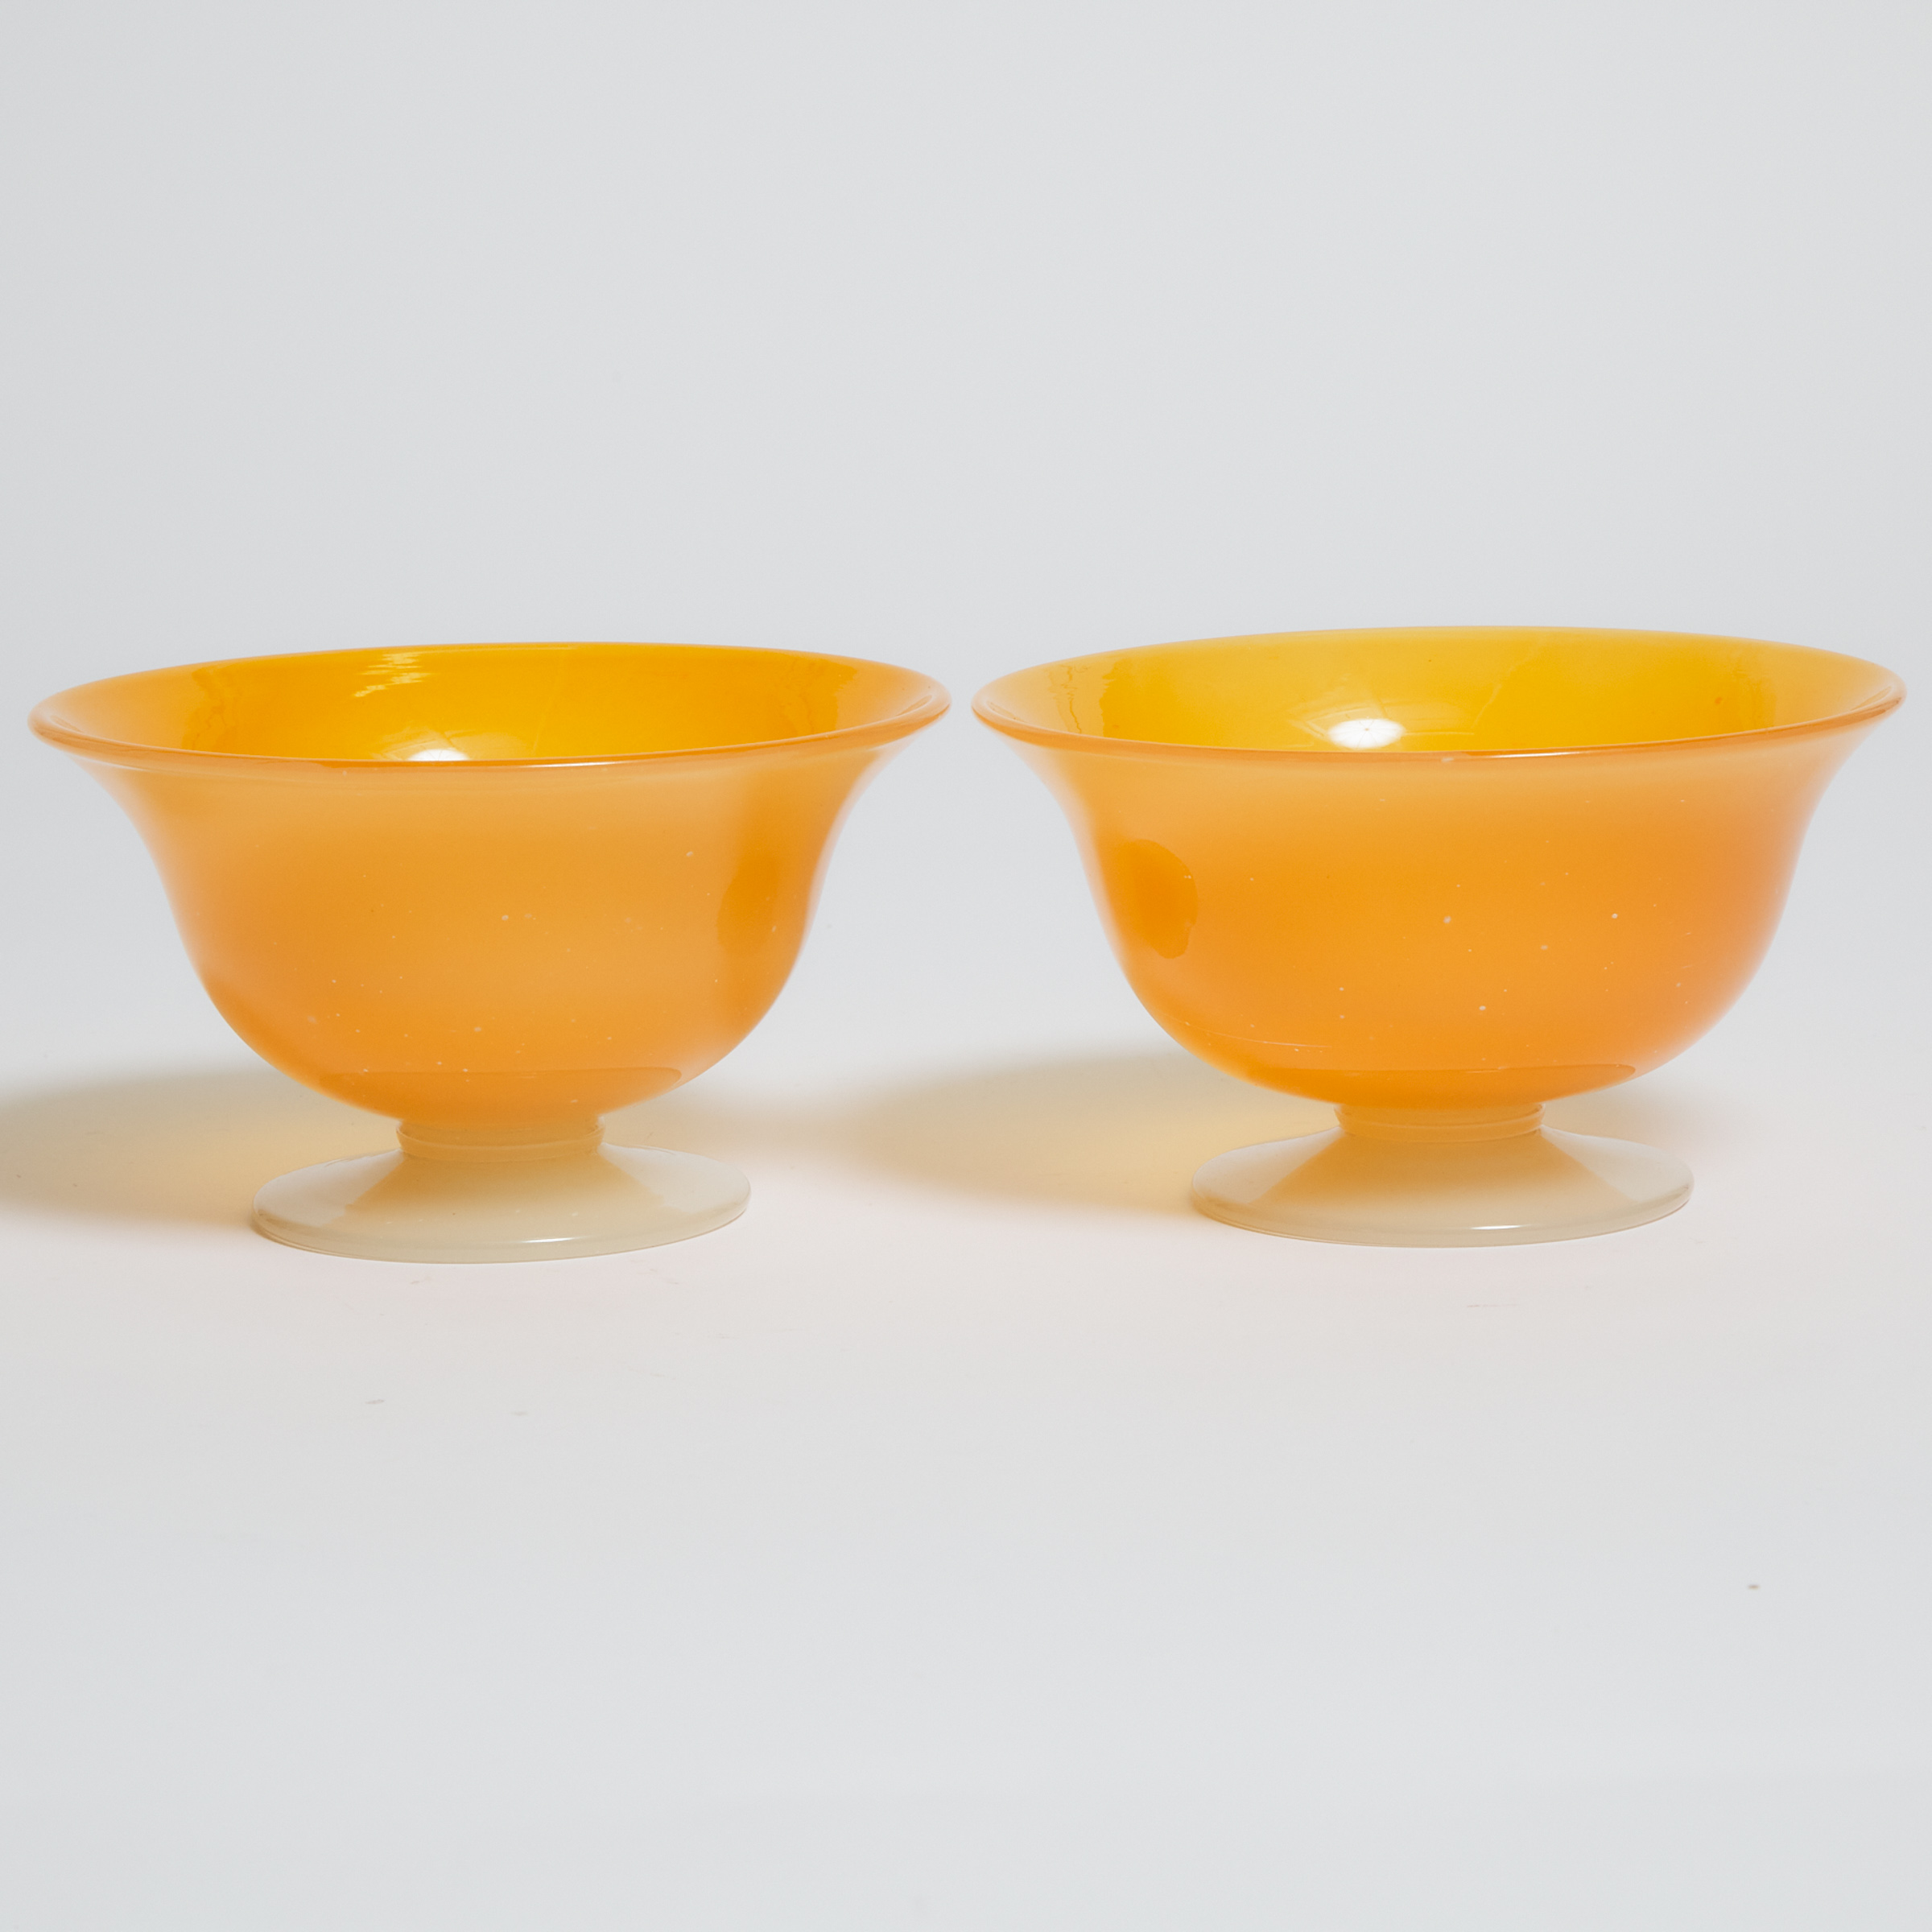 Pair of Orange Glass Bowls, probably Steuben, early 20th century 